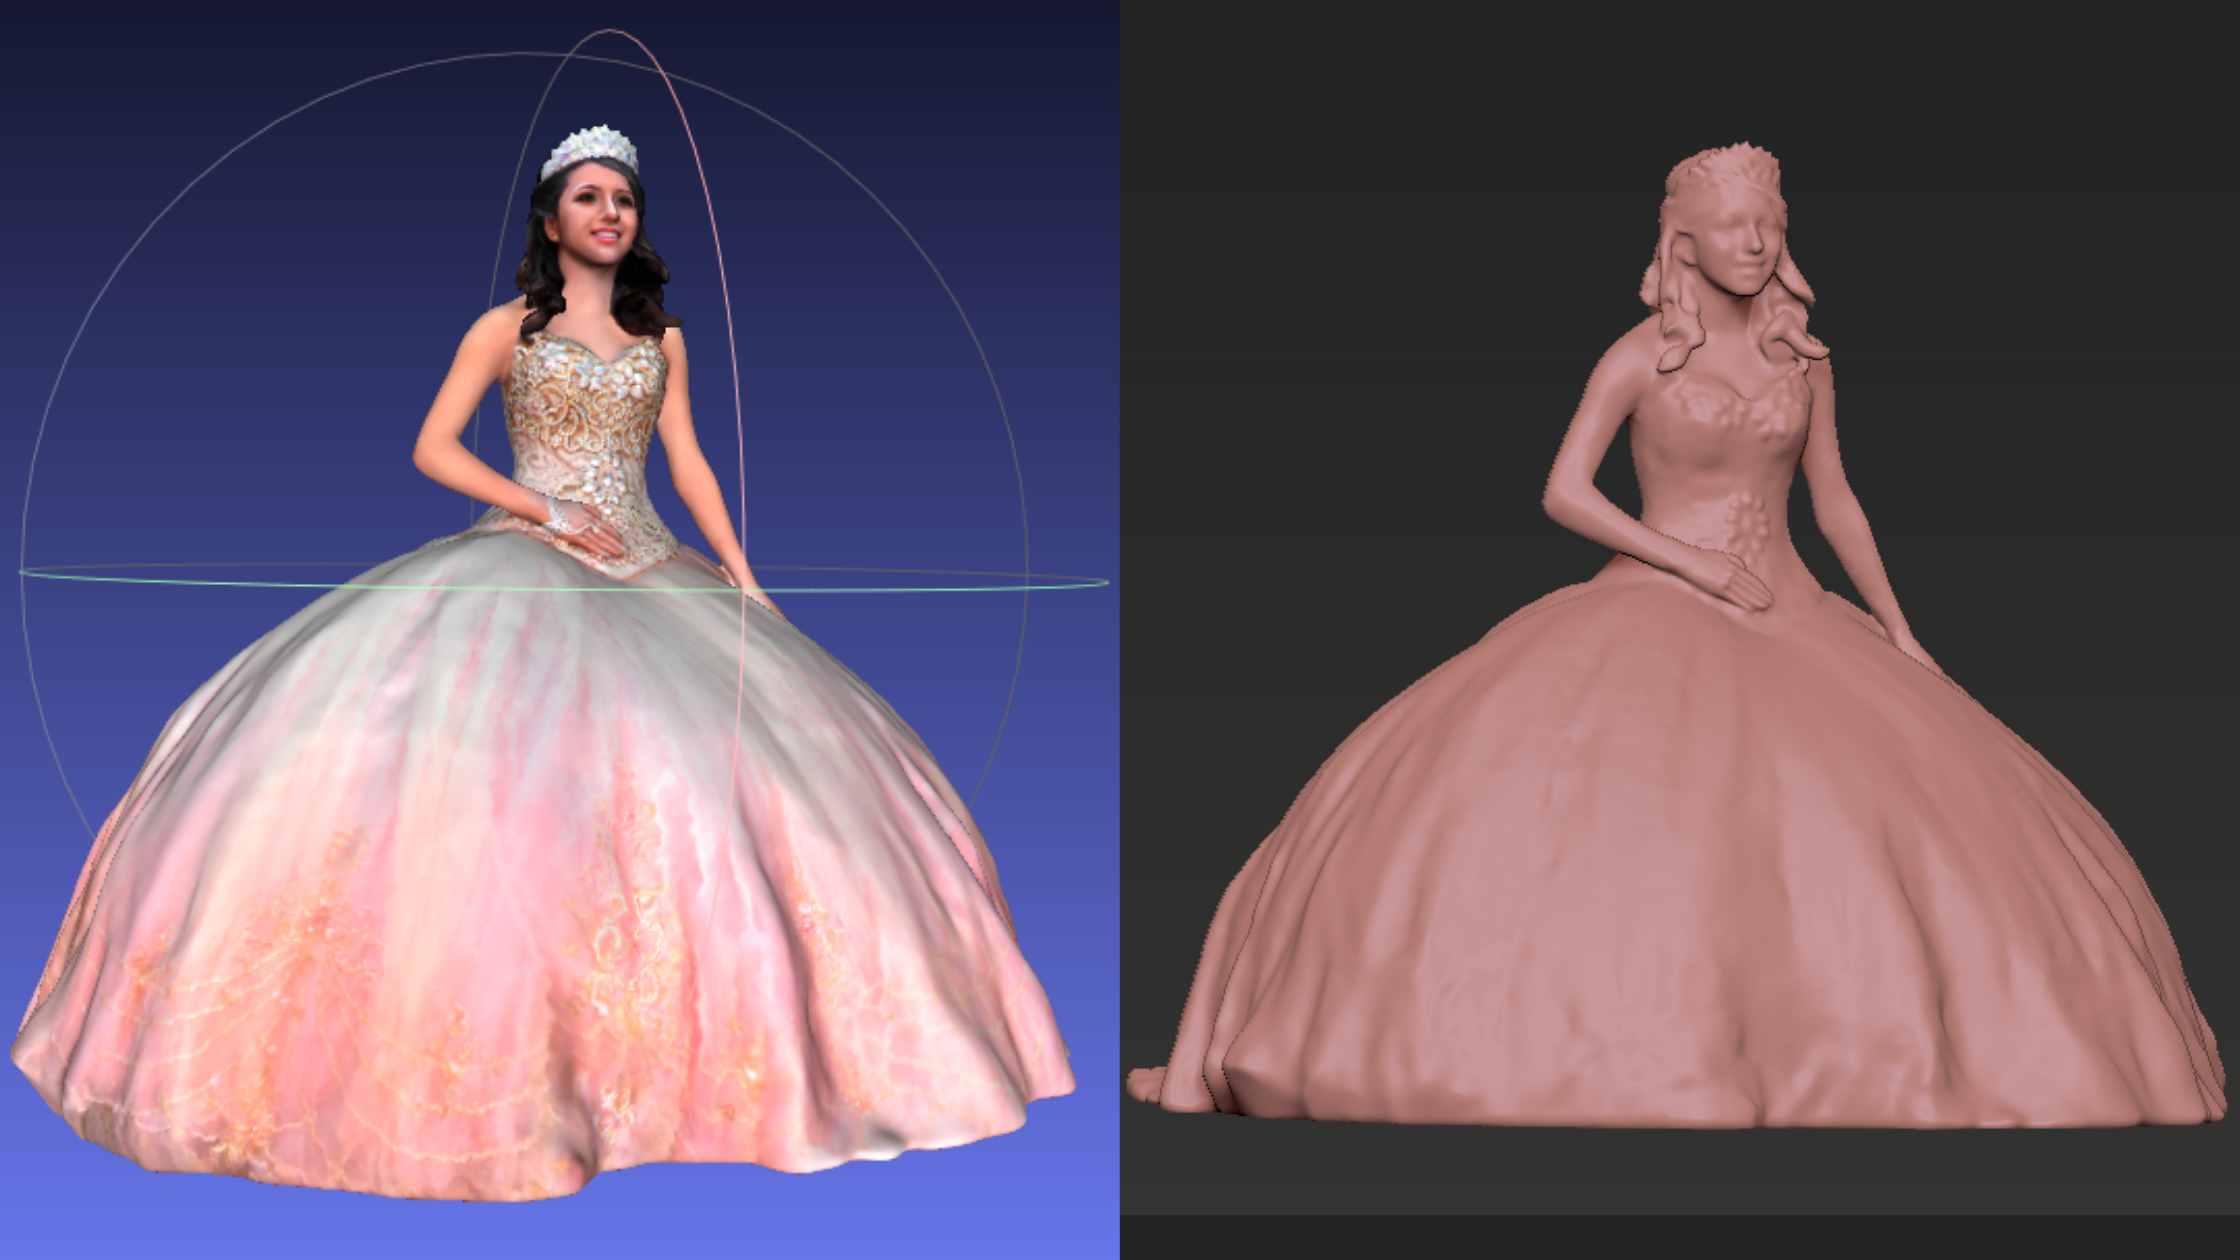 3D CAD model of a girl wearing her pink quinceanera dress.